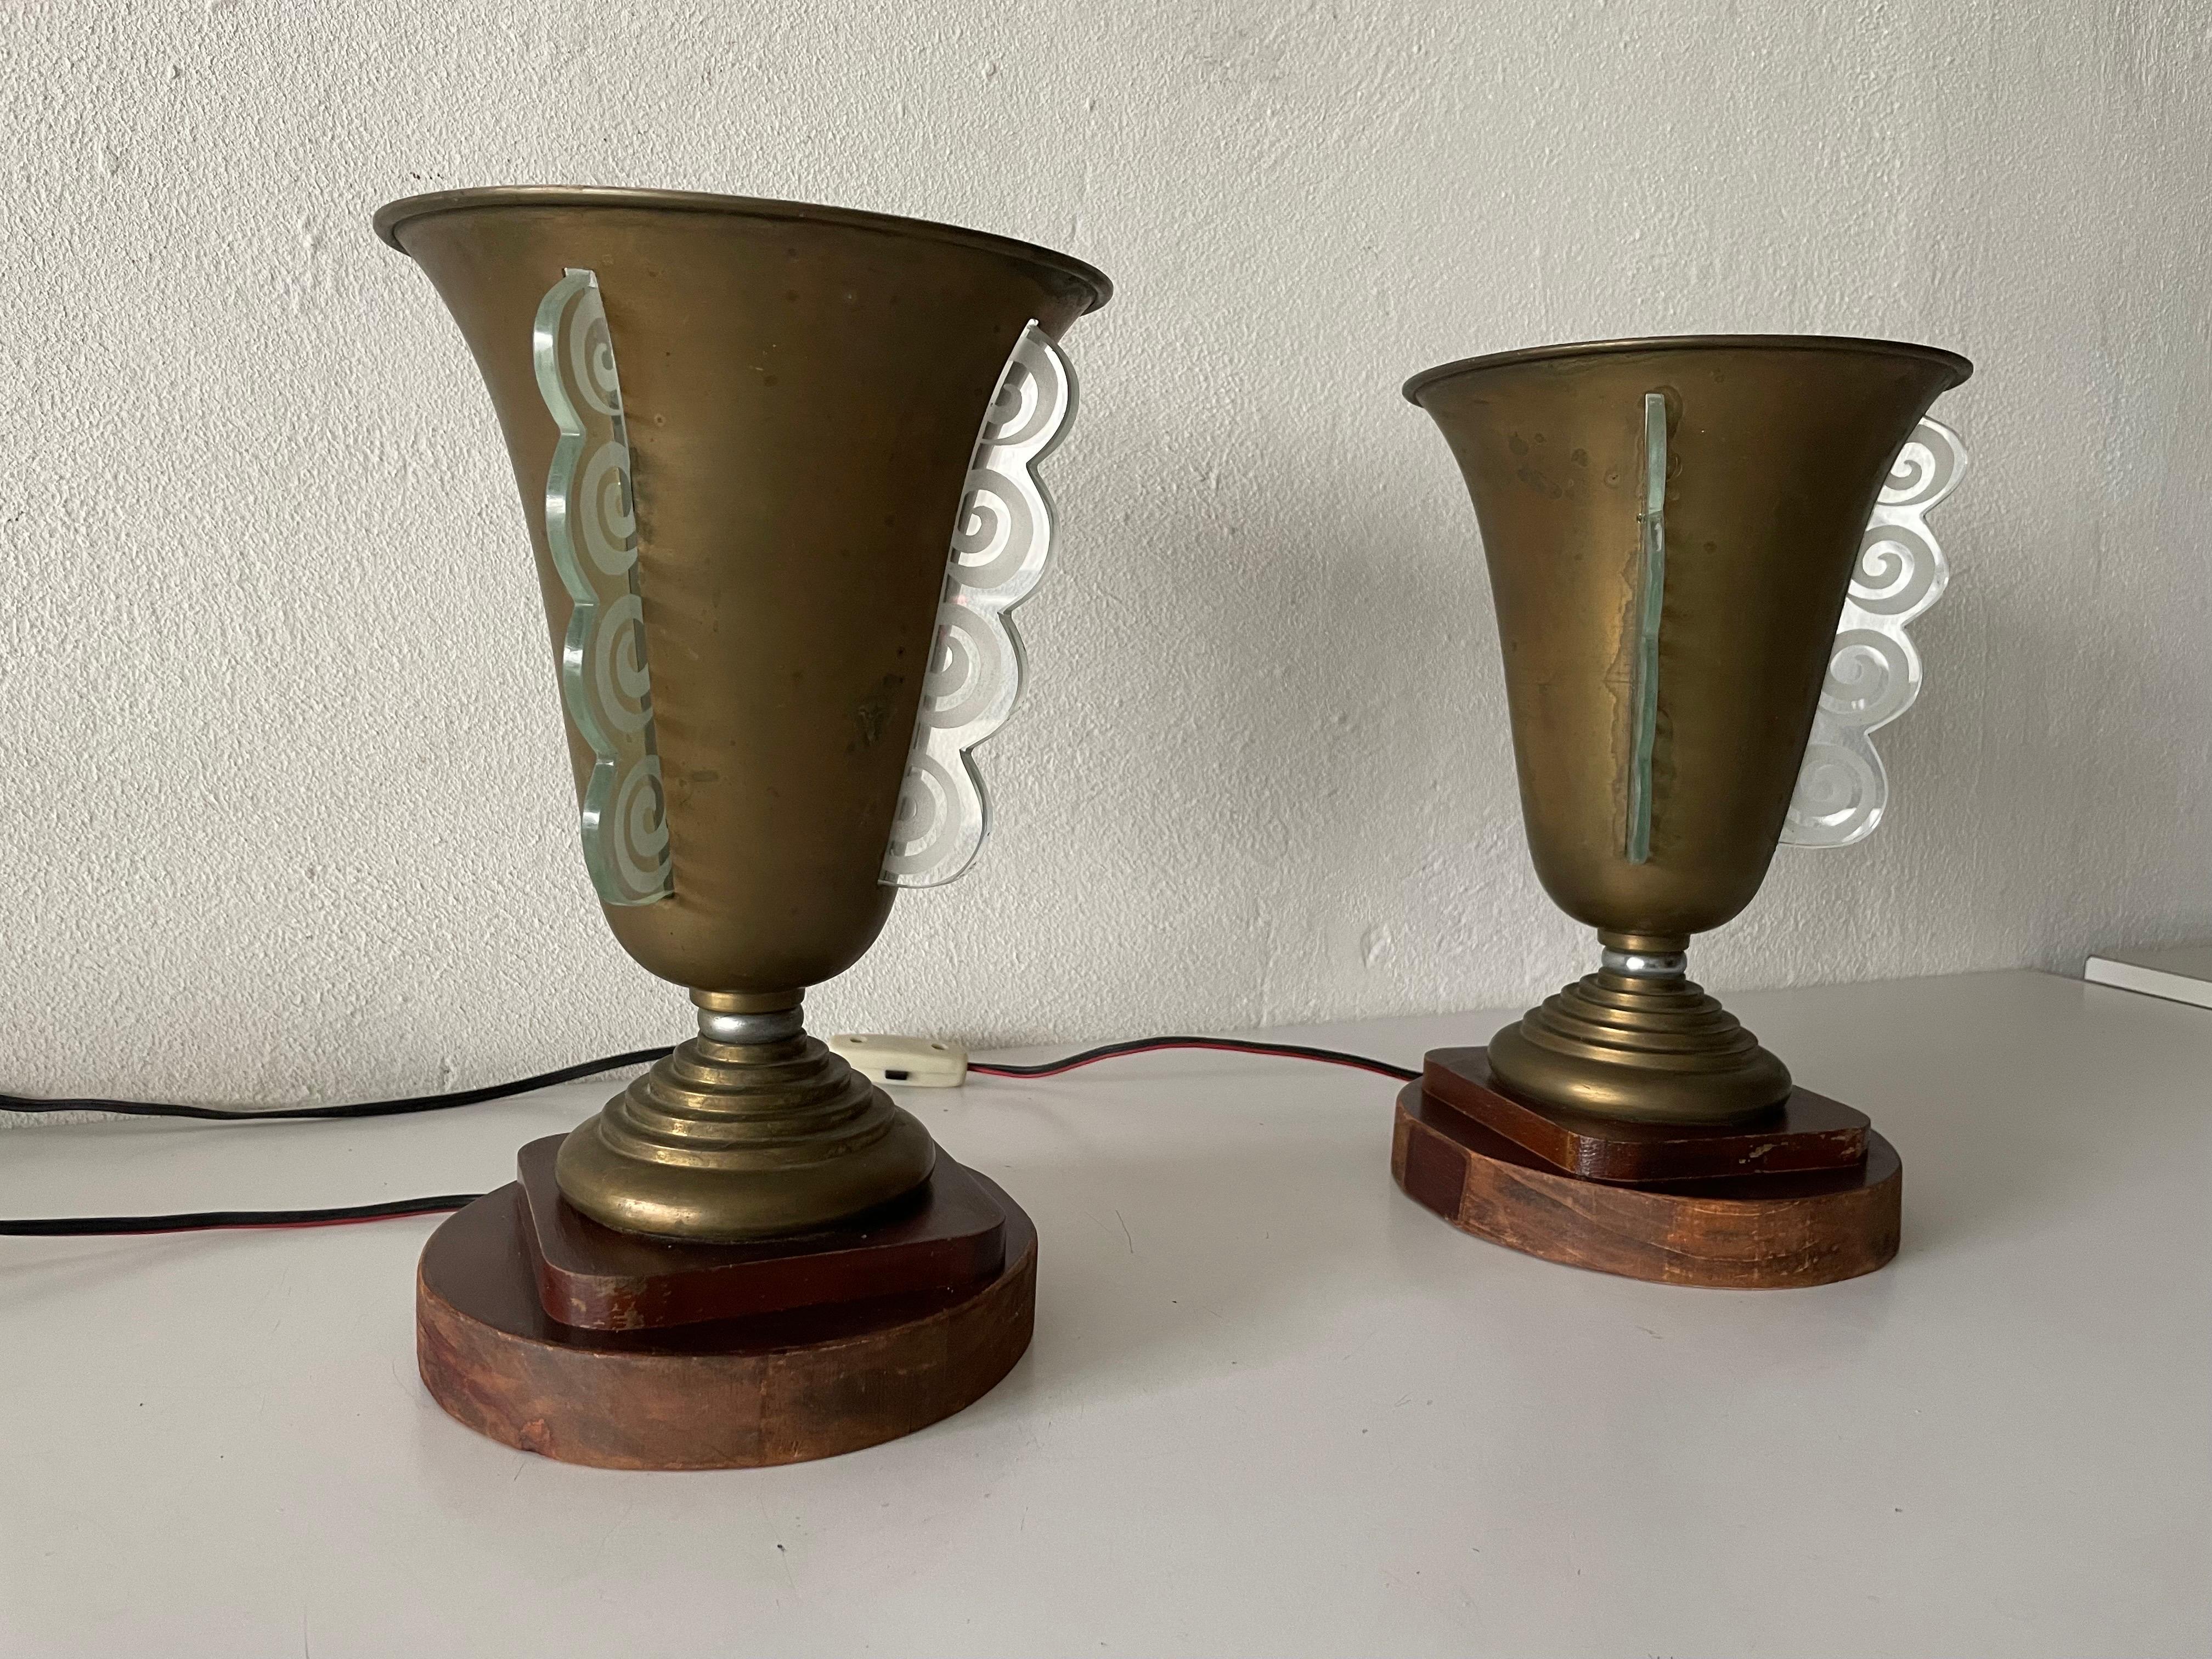 Art Deco Conic Design Pair of Table Lamps by Mazda, 1940s, France For Sale 2